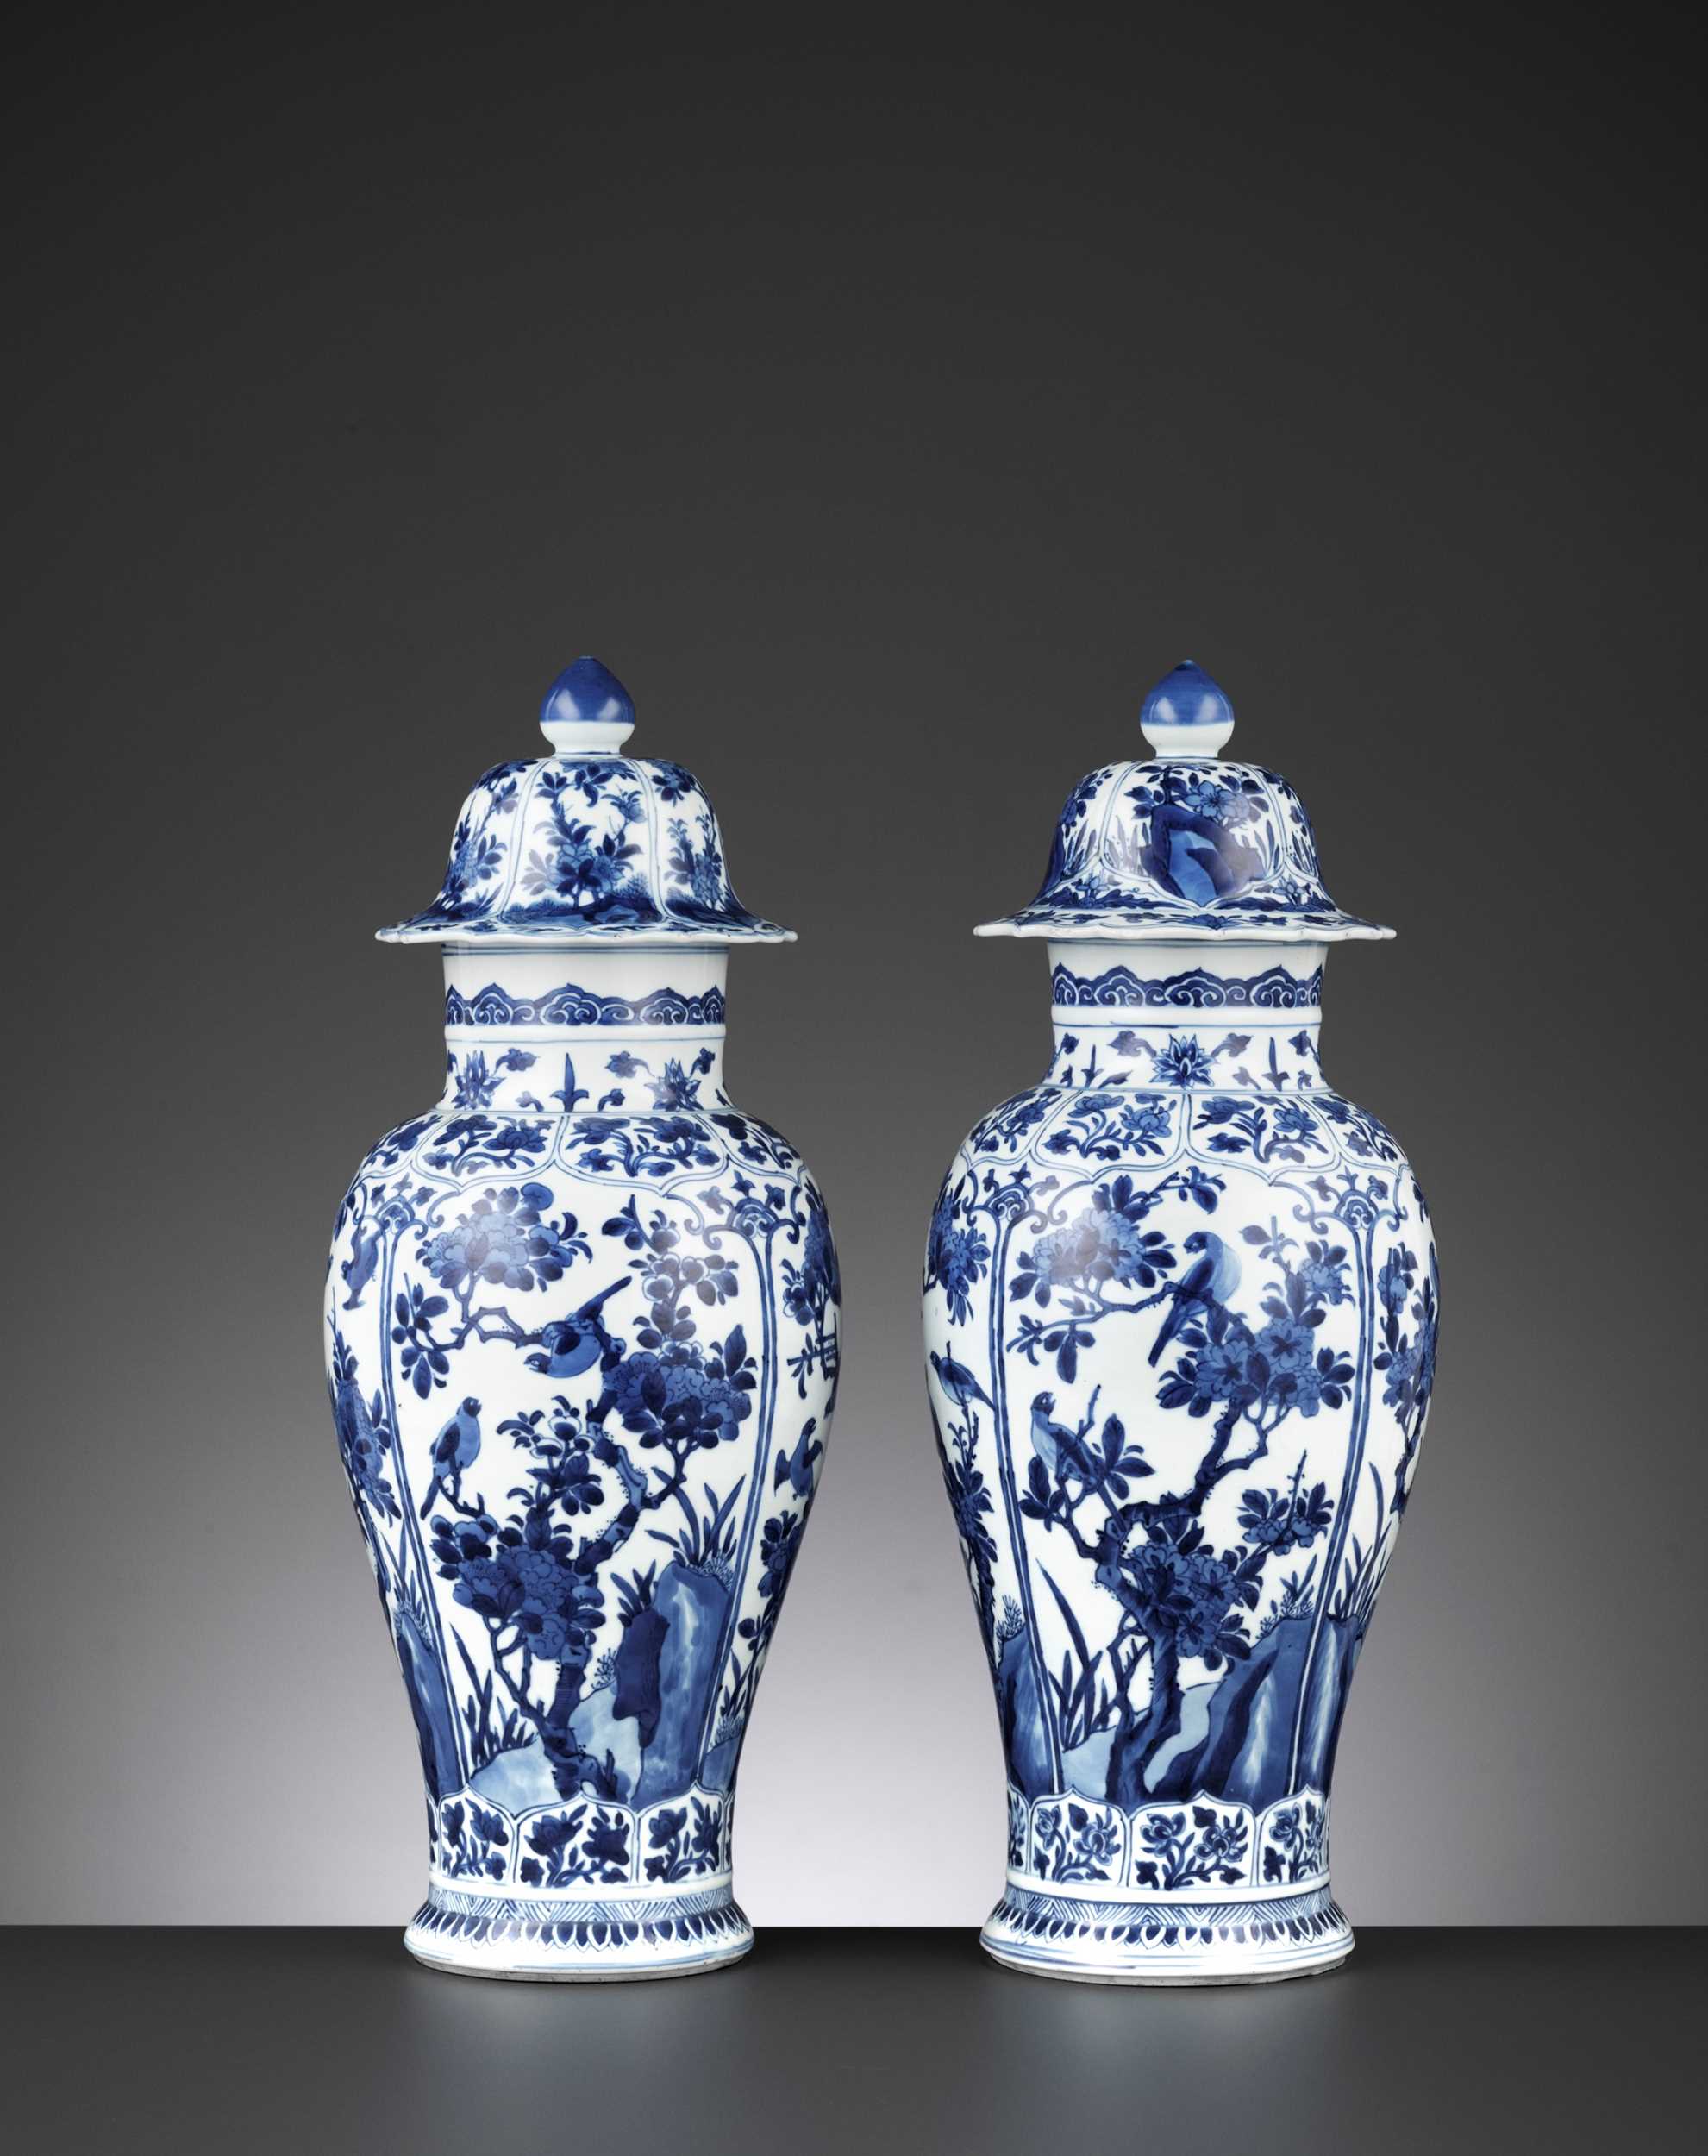 Lot 216 - A PAIR OF BLUE AND WHITE BALUSTER VASES AND COVERS, KANGXI PERIOD